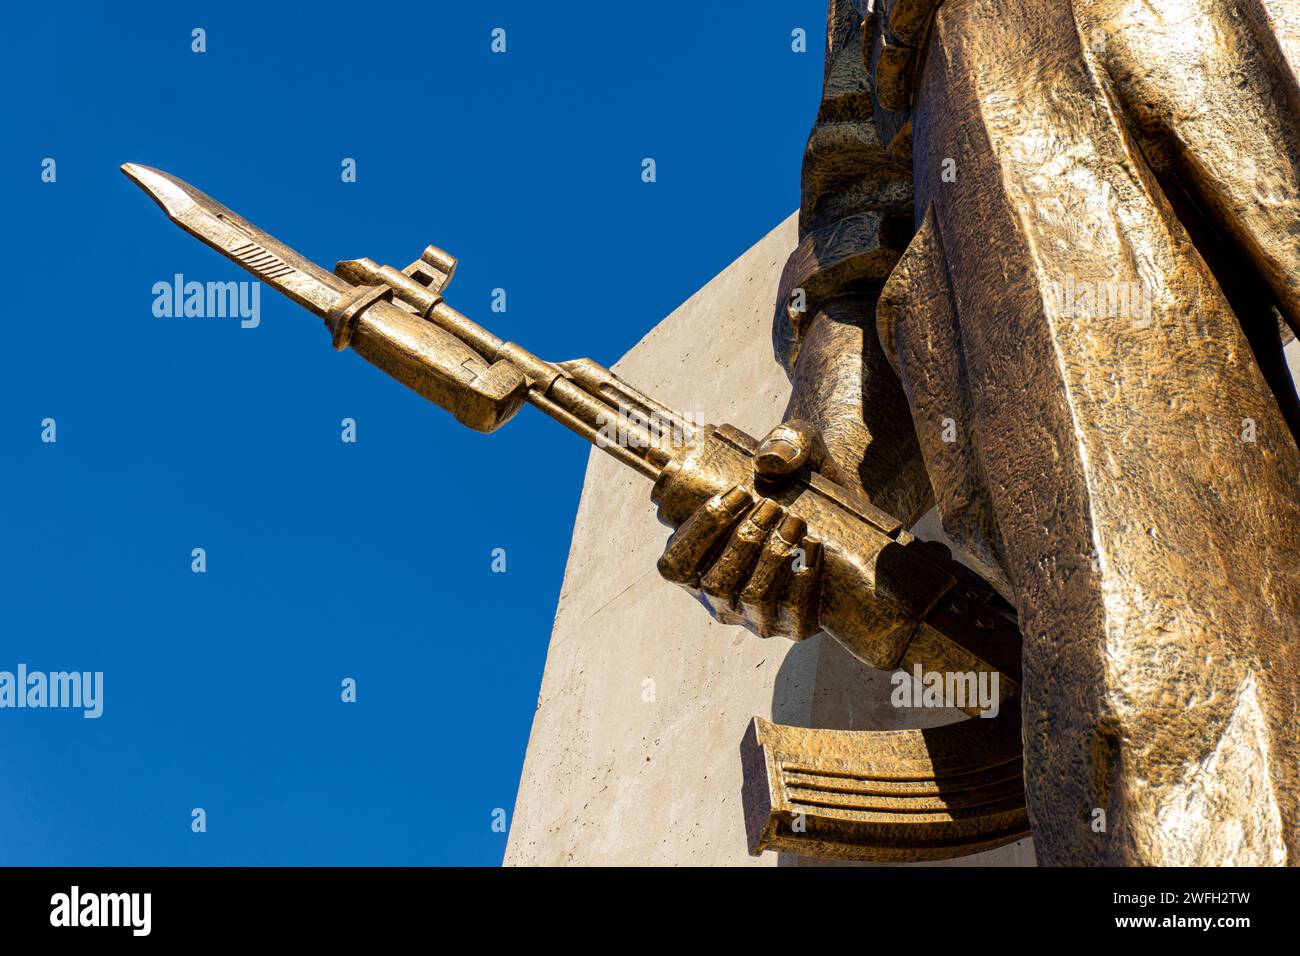 Low-angle view of a soldier statue holding a gun in Maqam Echahid monument against a blue sky. Stock Photo